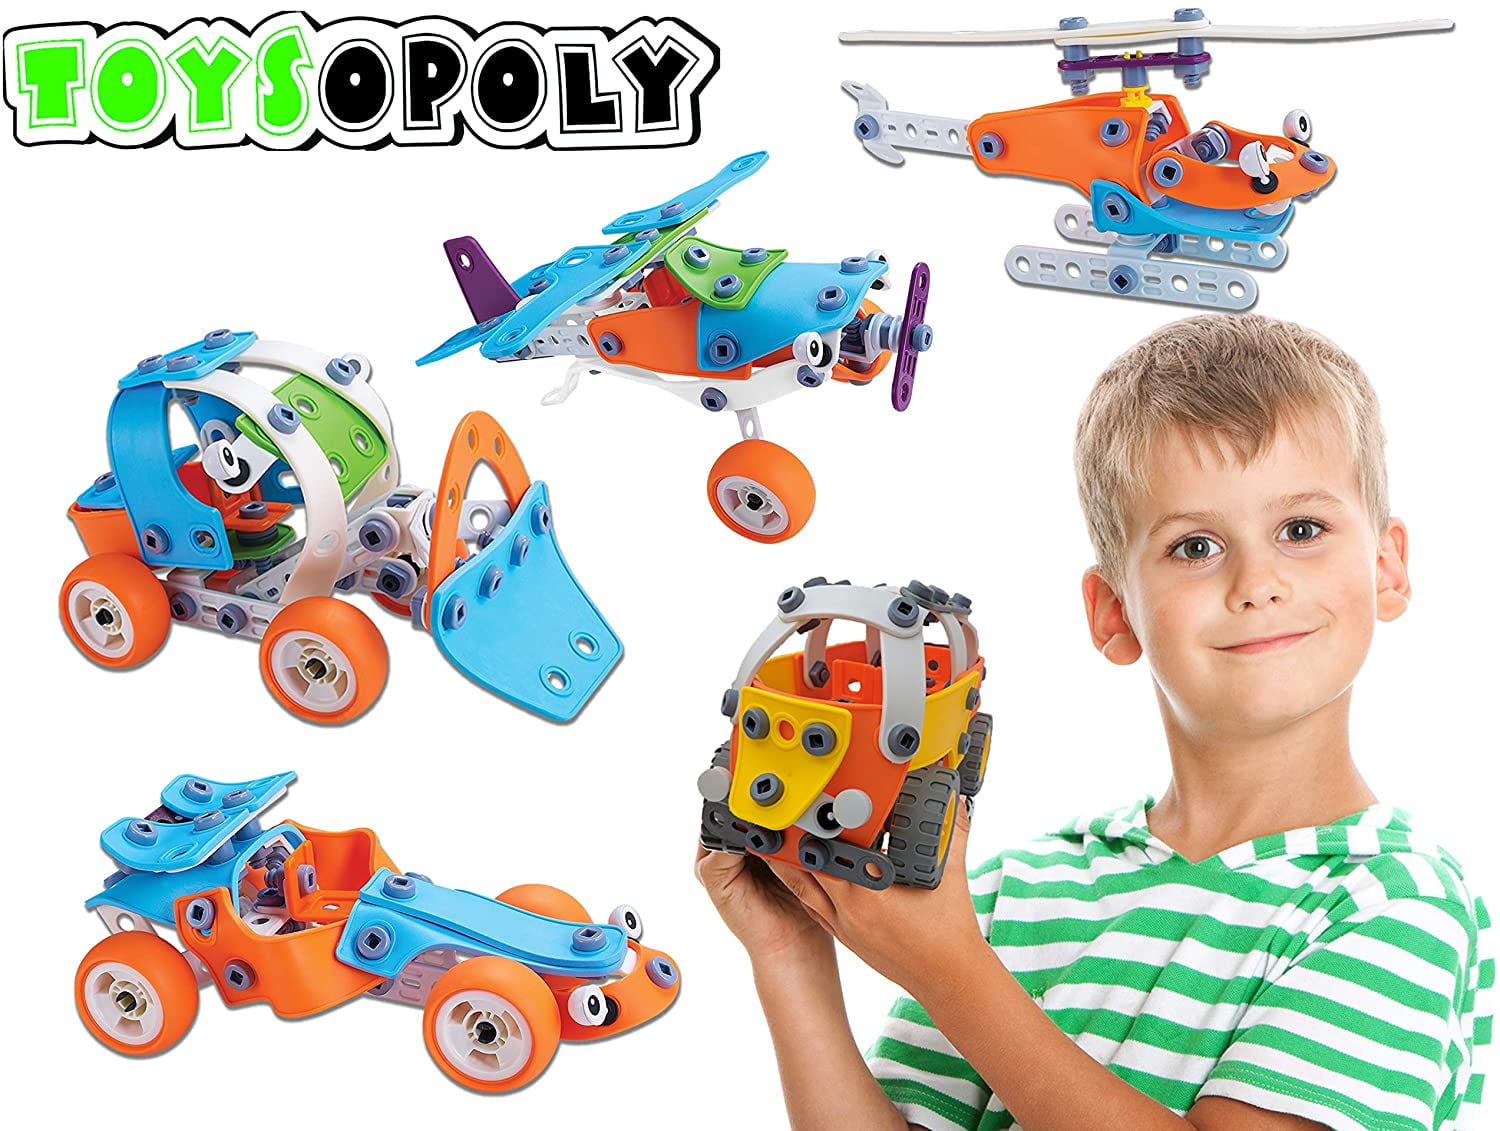 Helicopter Construction set Build and Play Childrens Toy Age 5+ 